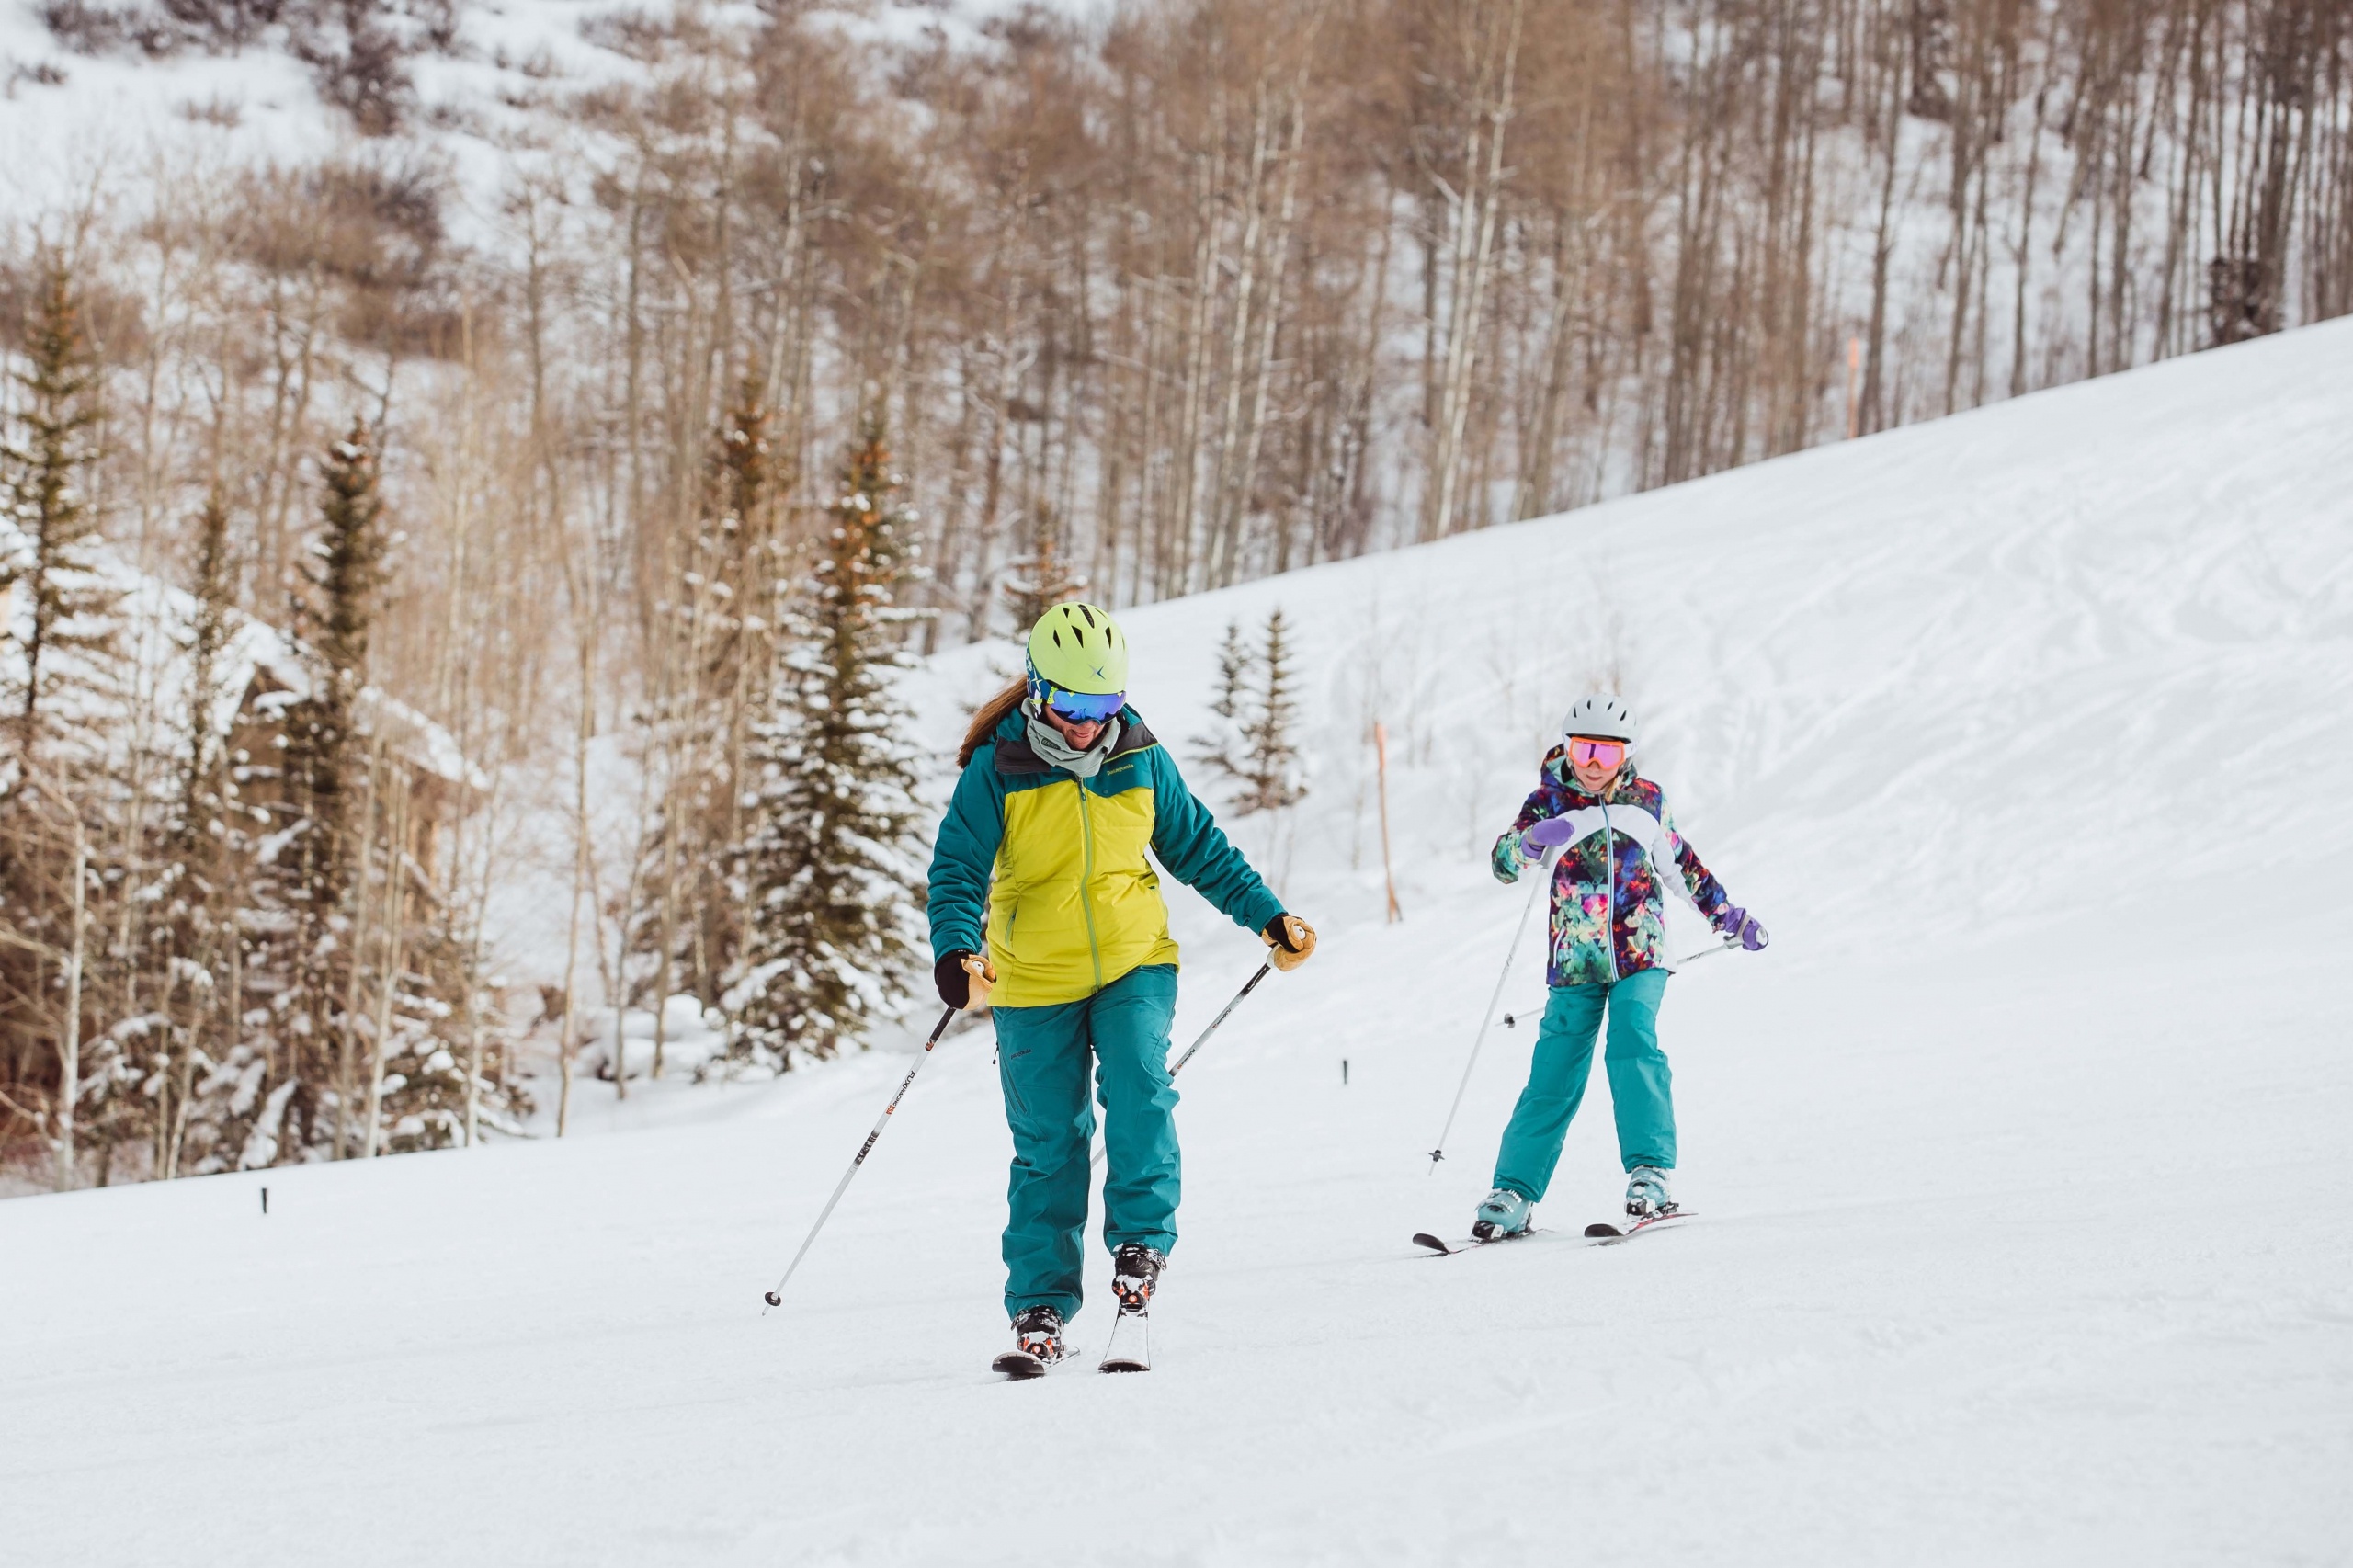 Learn How to Ski & Snowboard with Beginner’s Guide Video Series – PSIA-AASI